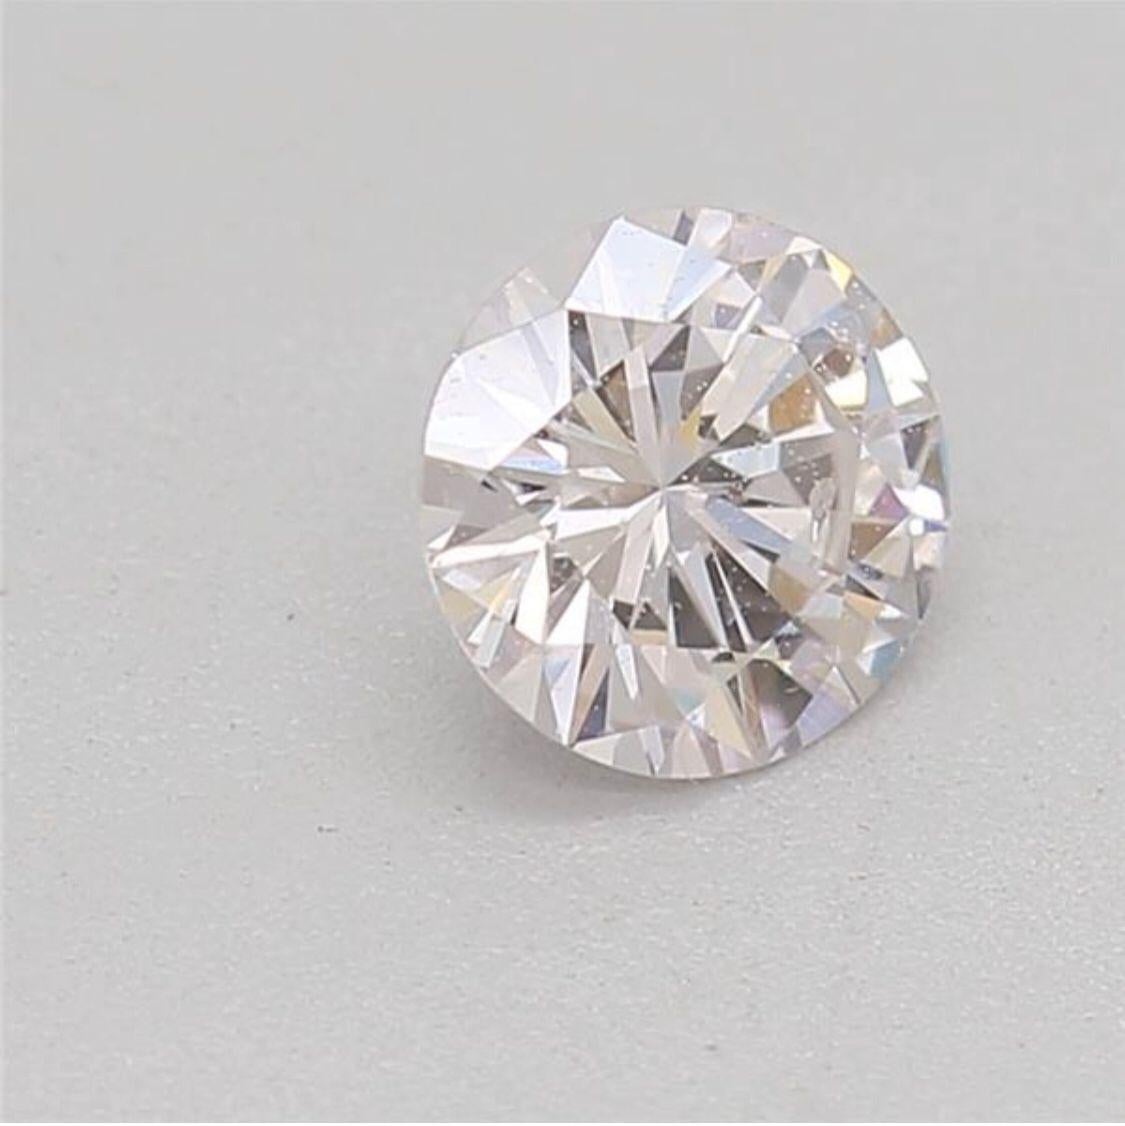 ***100% NATURAL FANCY COLOUR DIAMOND***

✪ Diamond Details ✪

➛ Shape: Round
➛ Colour Grade: Faint Pink
➛ Carat: 0.31
➛ Clarity: SI1
➛ CGL Certified 

^FEATURES OF THE DIAMOND^

This 0.31 carat faint pink diamond is a diamond that weighs 0.31 carats